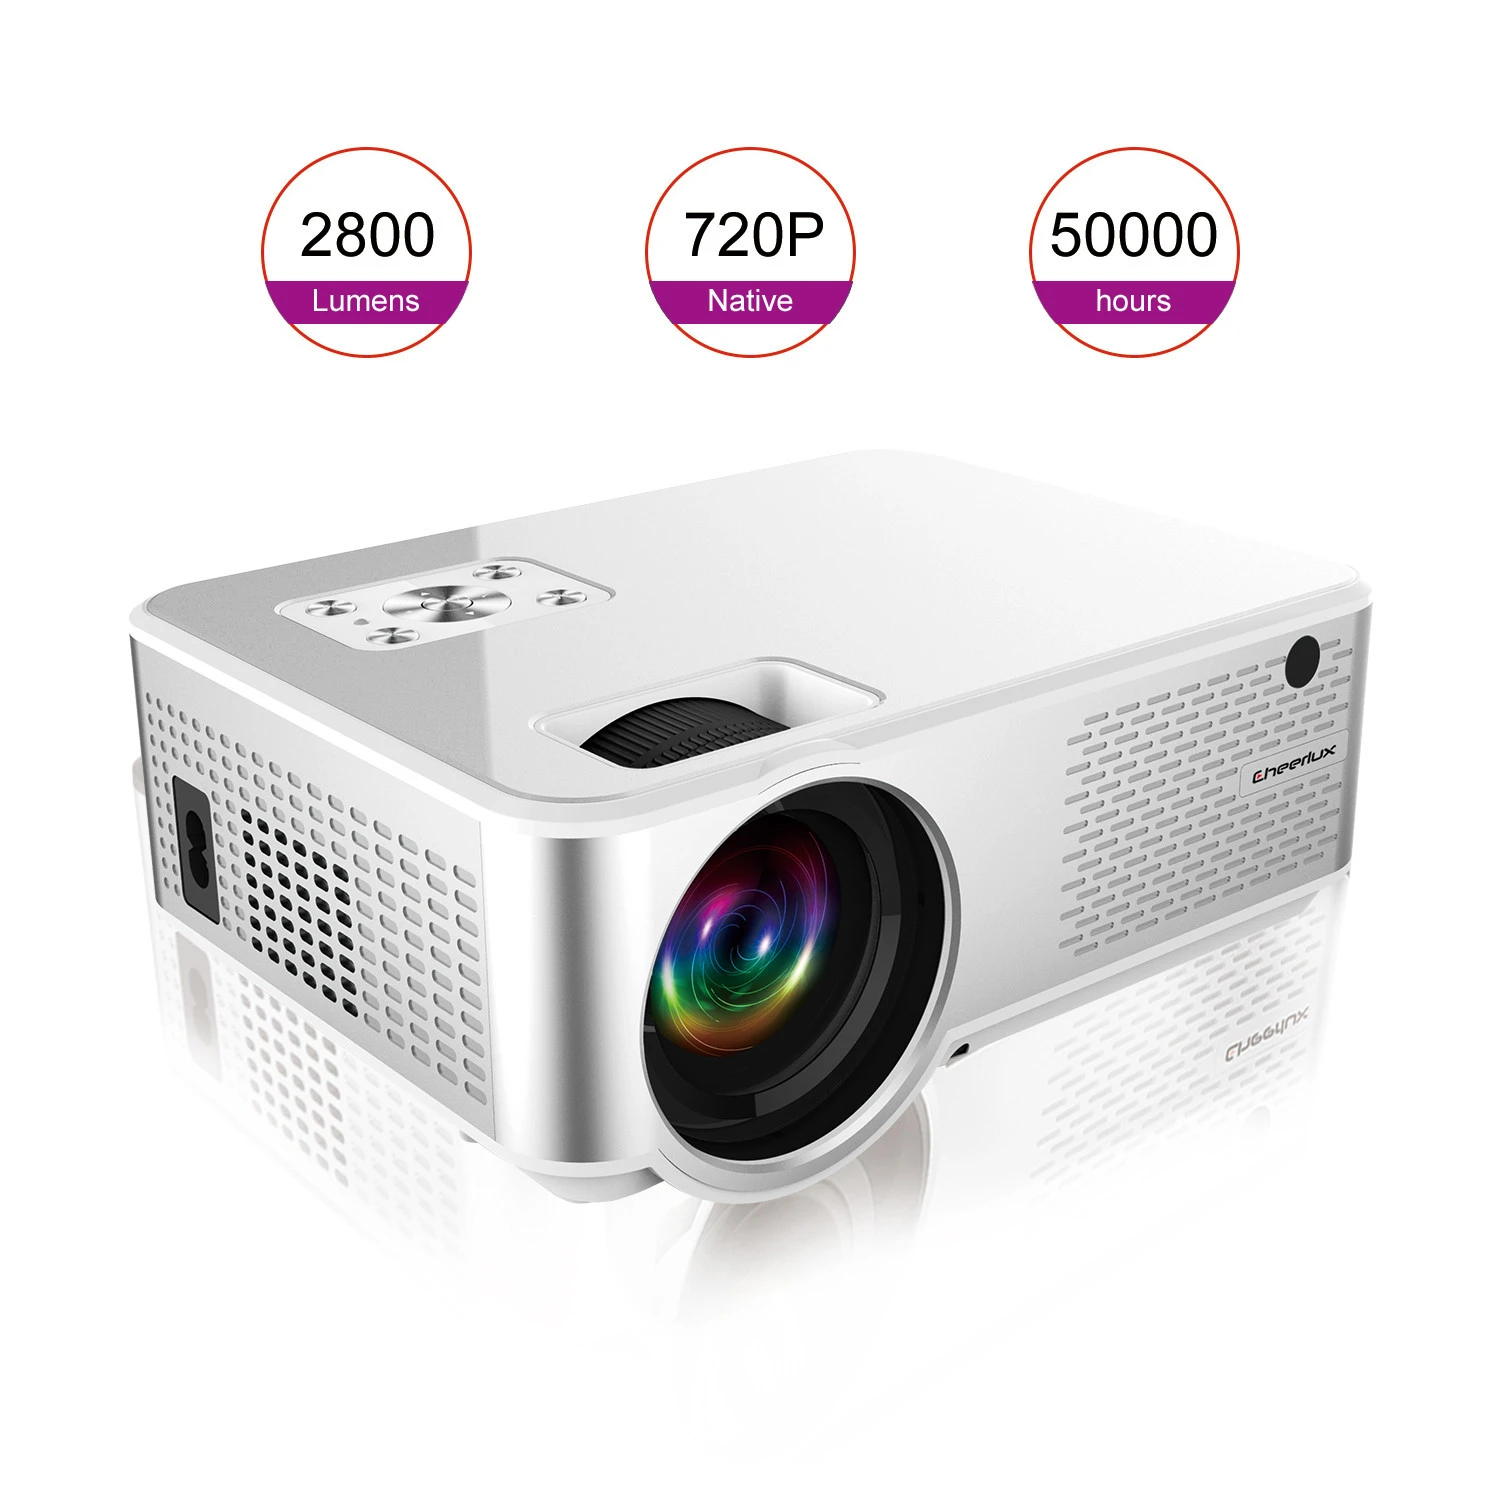 CHEERLUX C9 Newest HD Projector native 720P 2800 lumens LED Projector Home Theater Projector